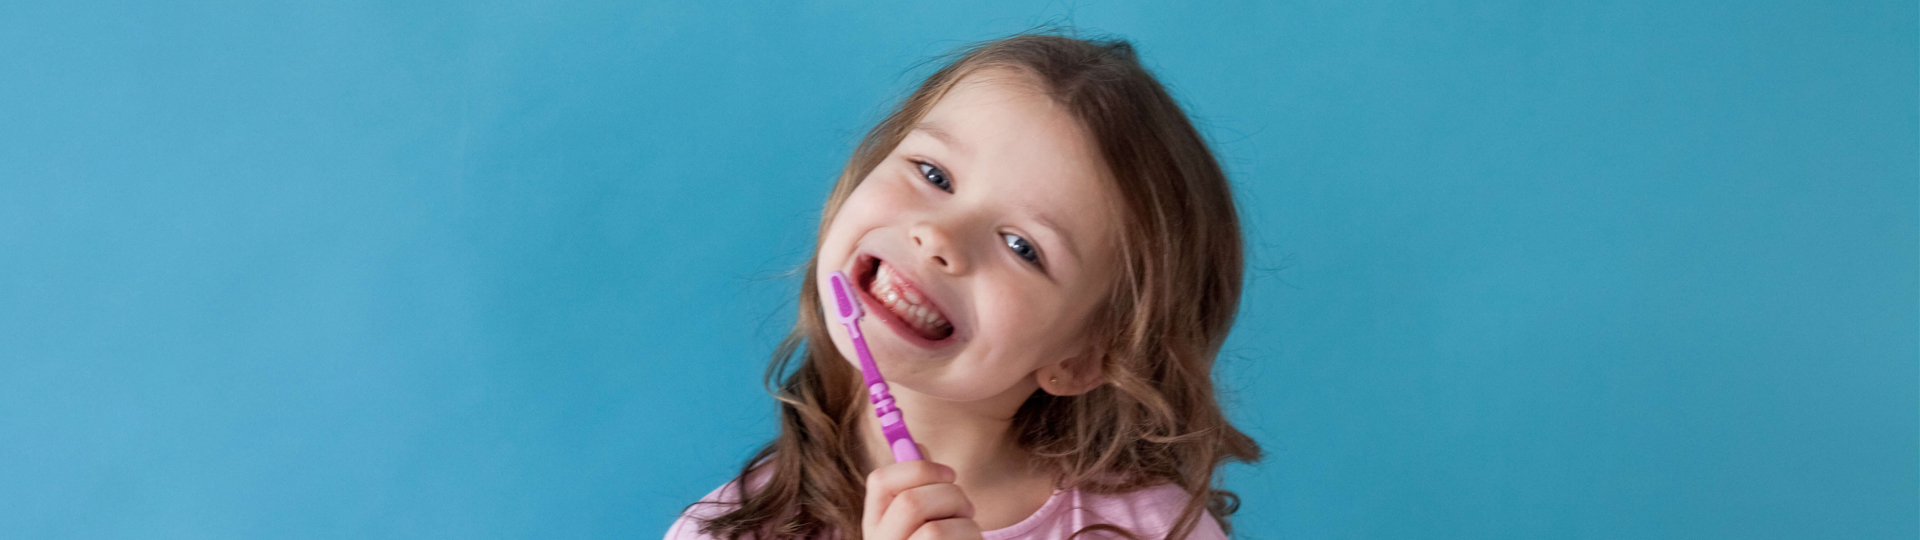 Basic Facts About Emergency Pediatric Dentist in Houston, TX